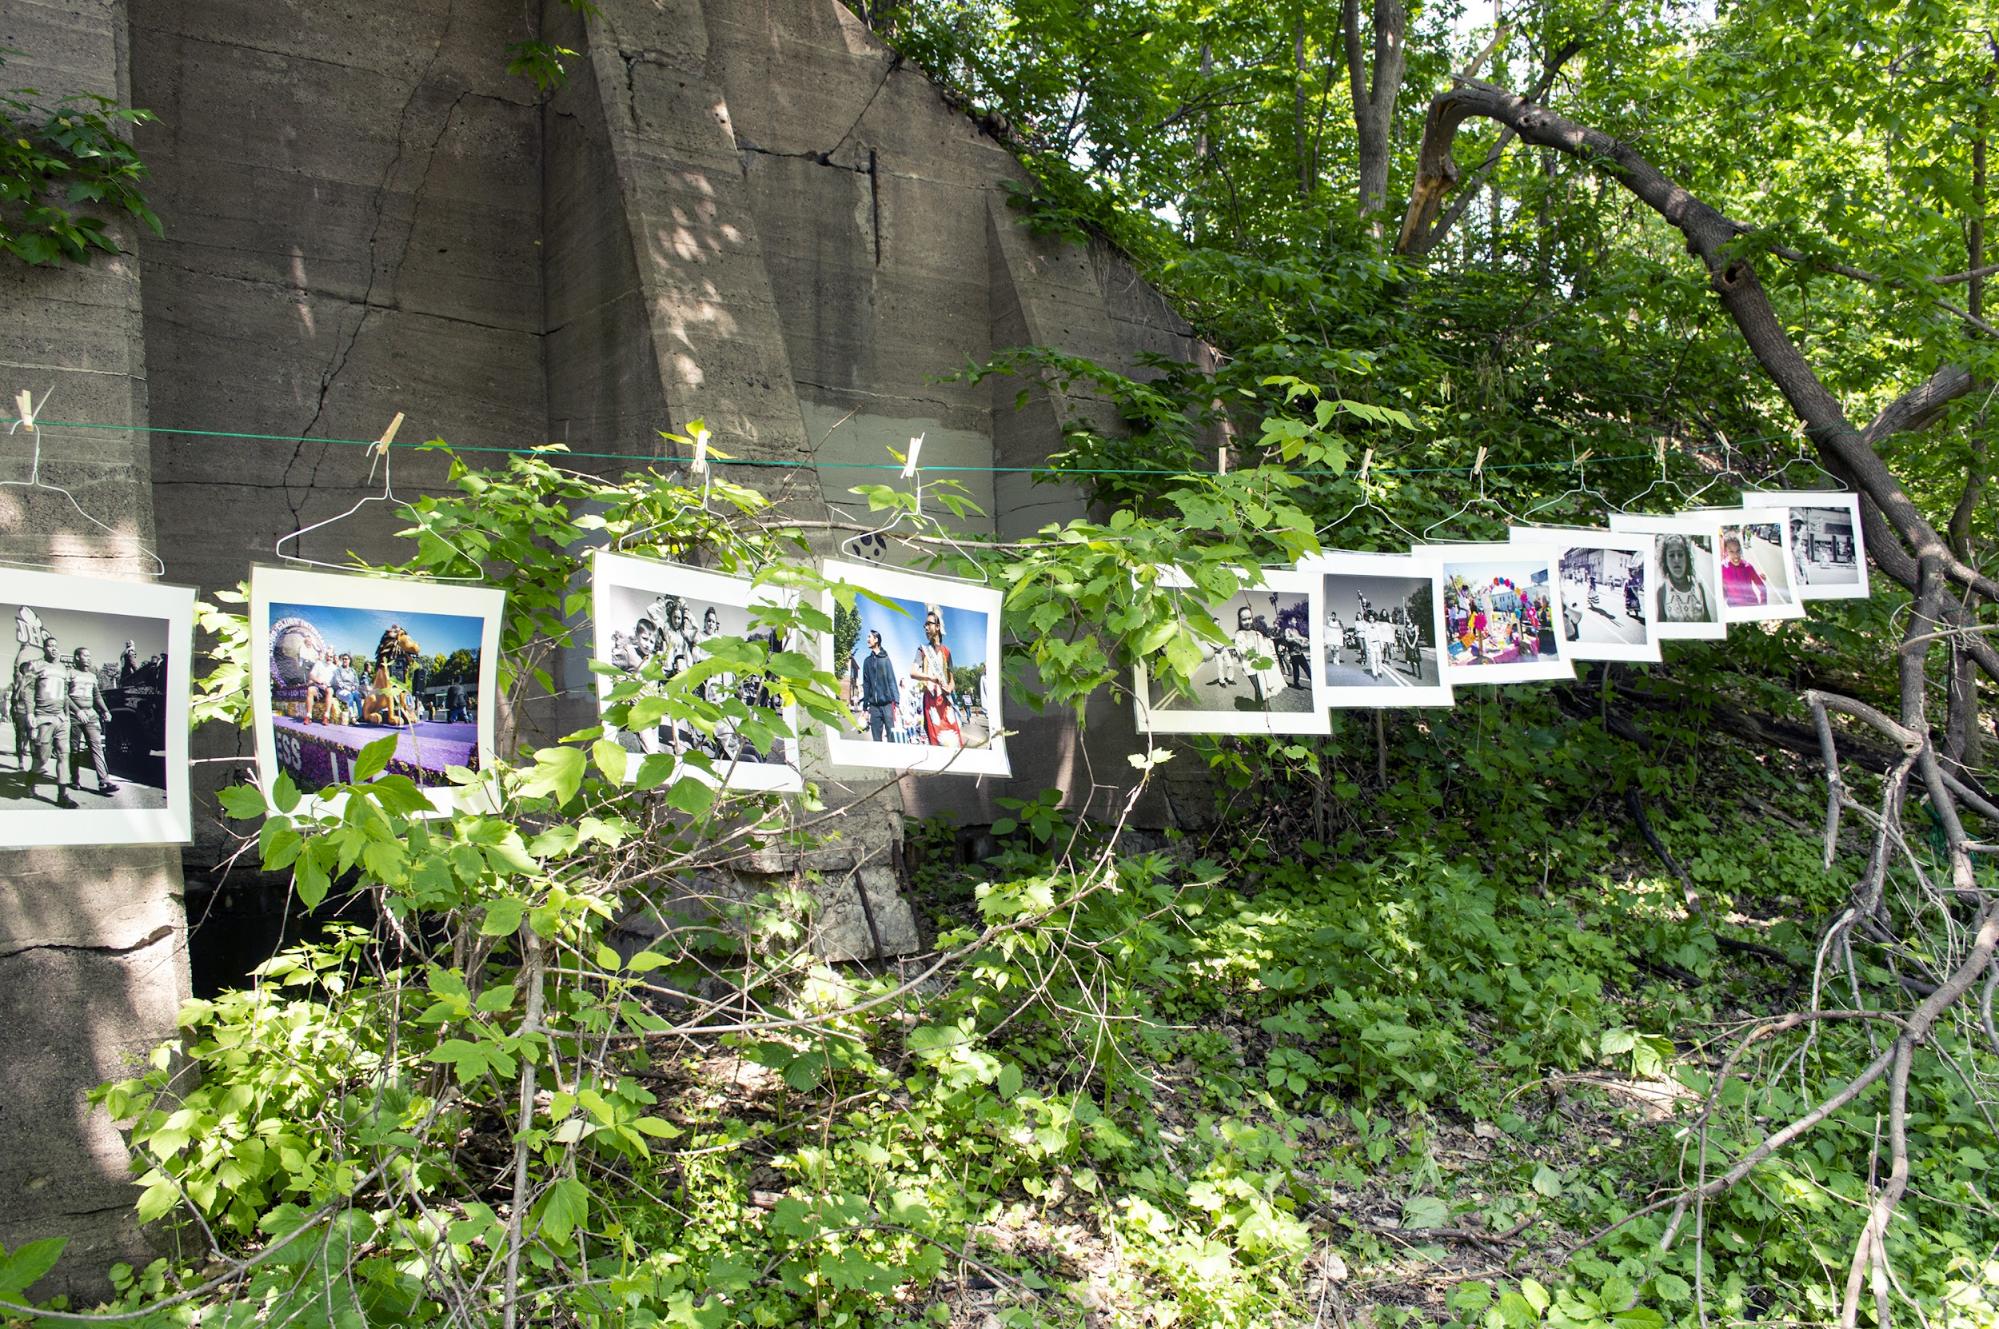 “Parade Through the Hollow,” an art installation by St. Paul photographer Stephan F. Kistler, in Swede Hollow Park on June 1. (Mandy Hathaway / The Metropolitan)